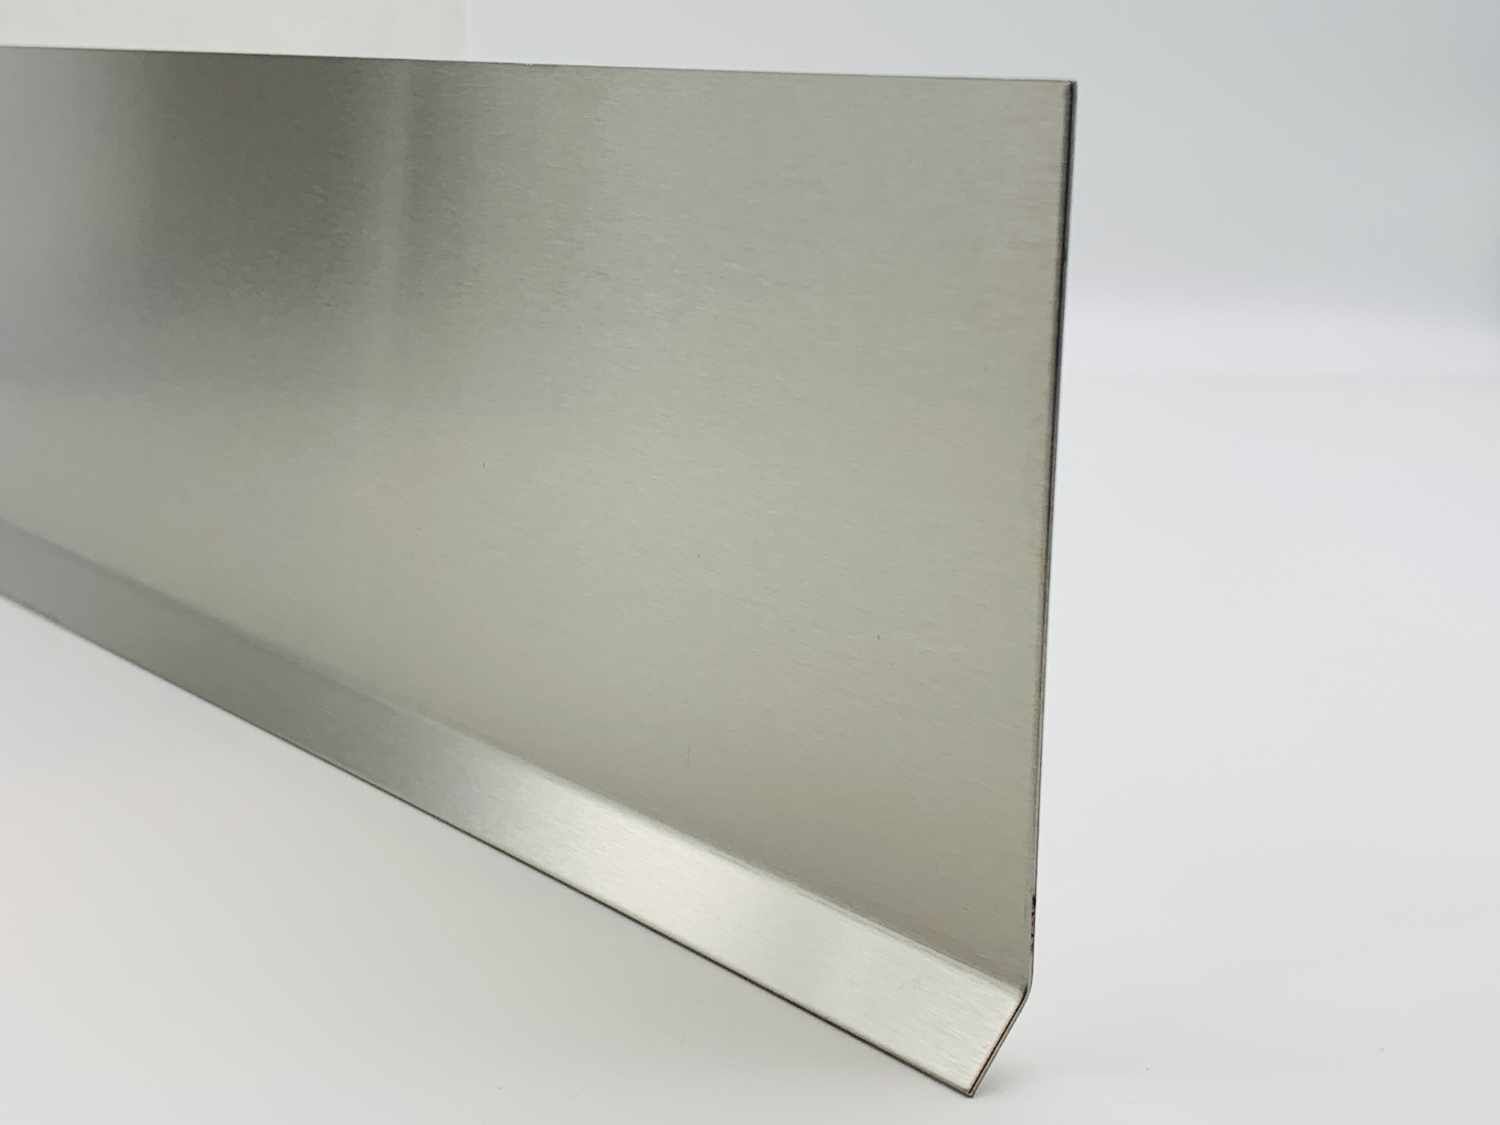 Choice 10 Mirror Finish Stainless Steel Plate Cover